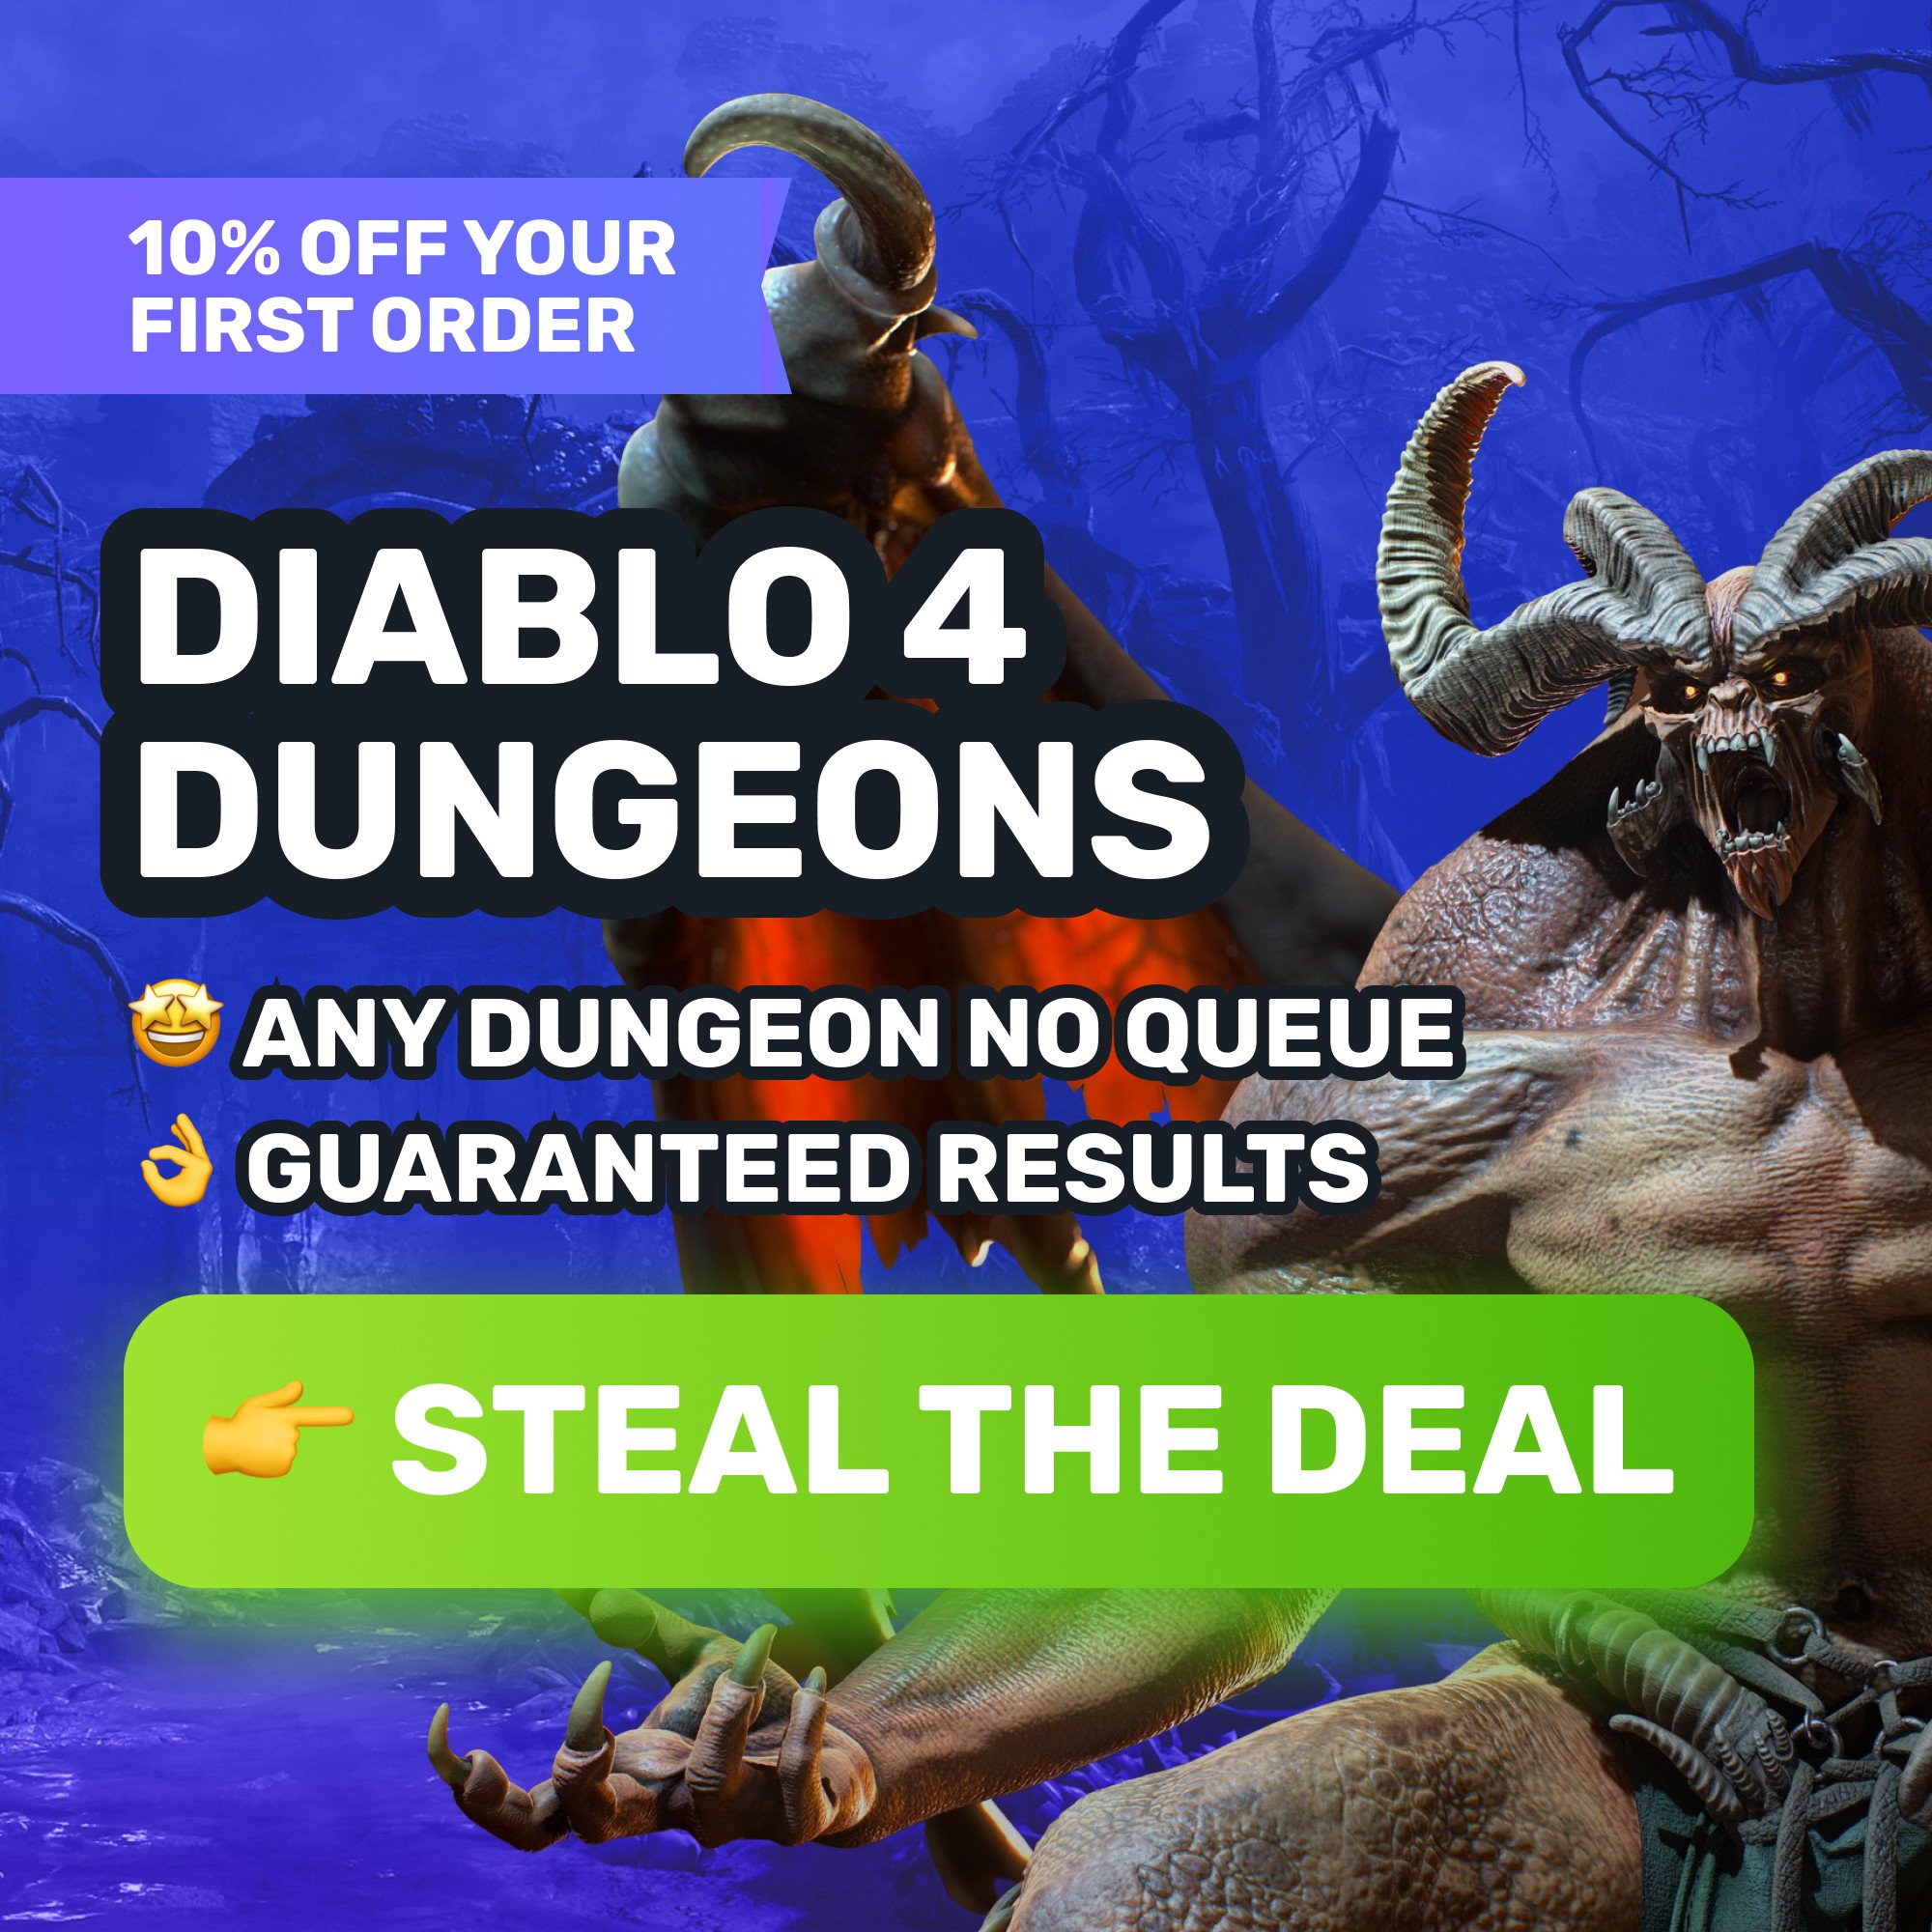 Dungeons in Roblox Dungeon Quest: Dungeon types, enemies, and more